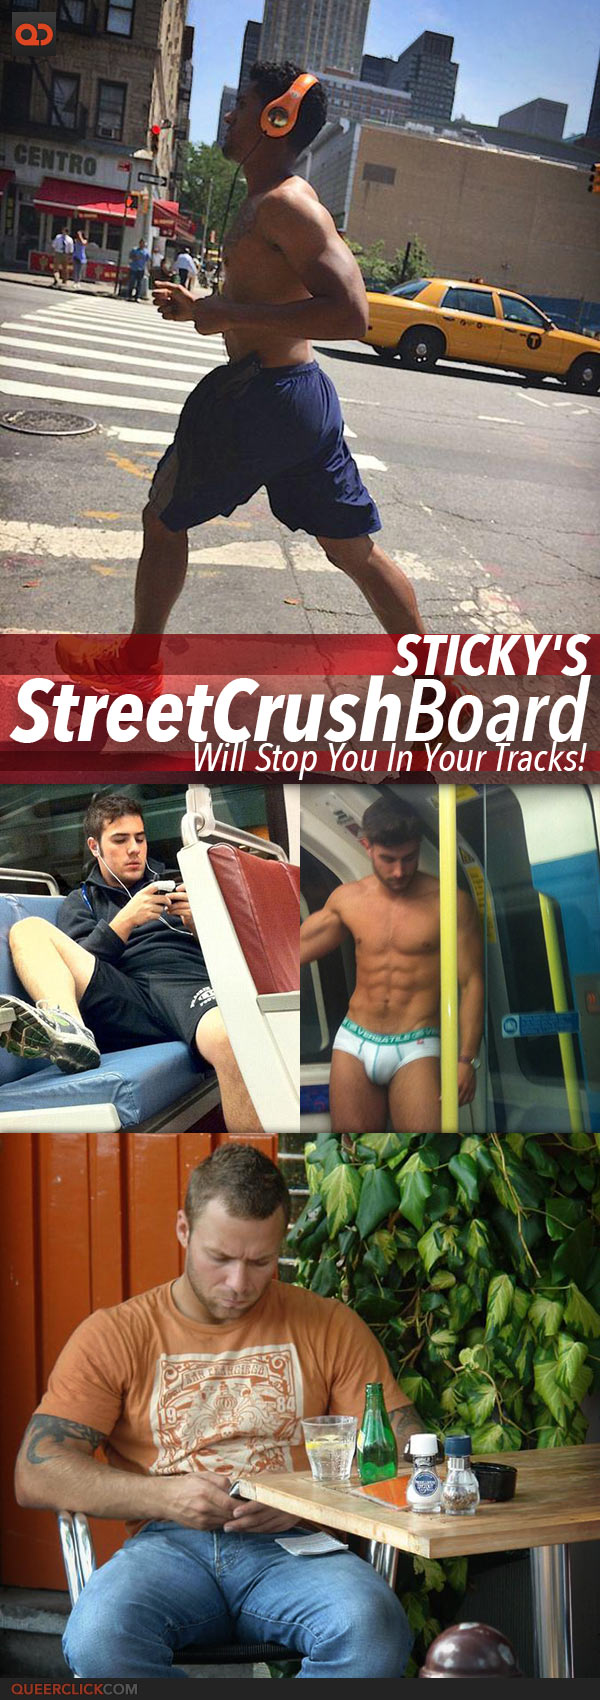 Sticky's Street Crush Board Will Stop You In Your Tracks!